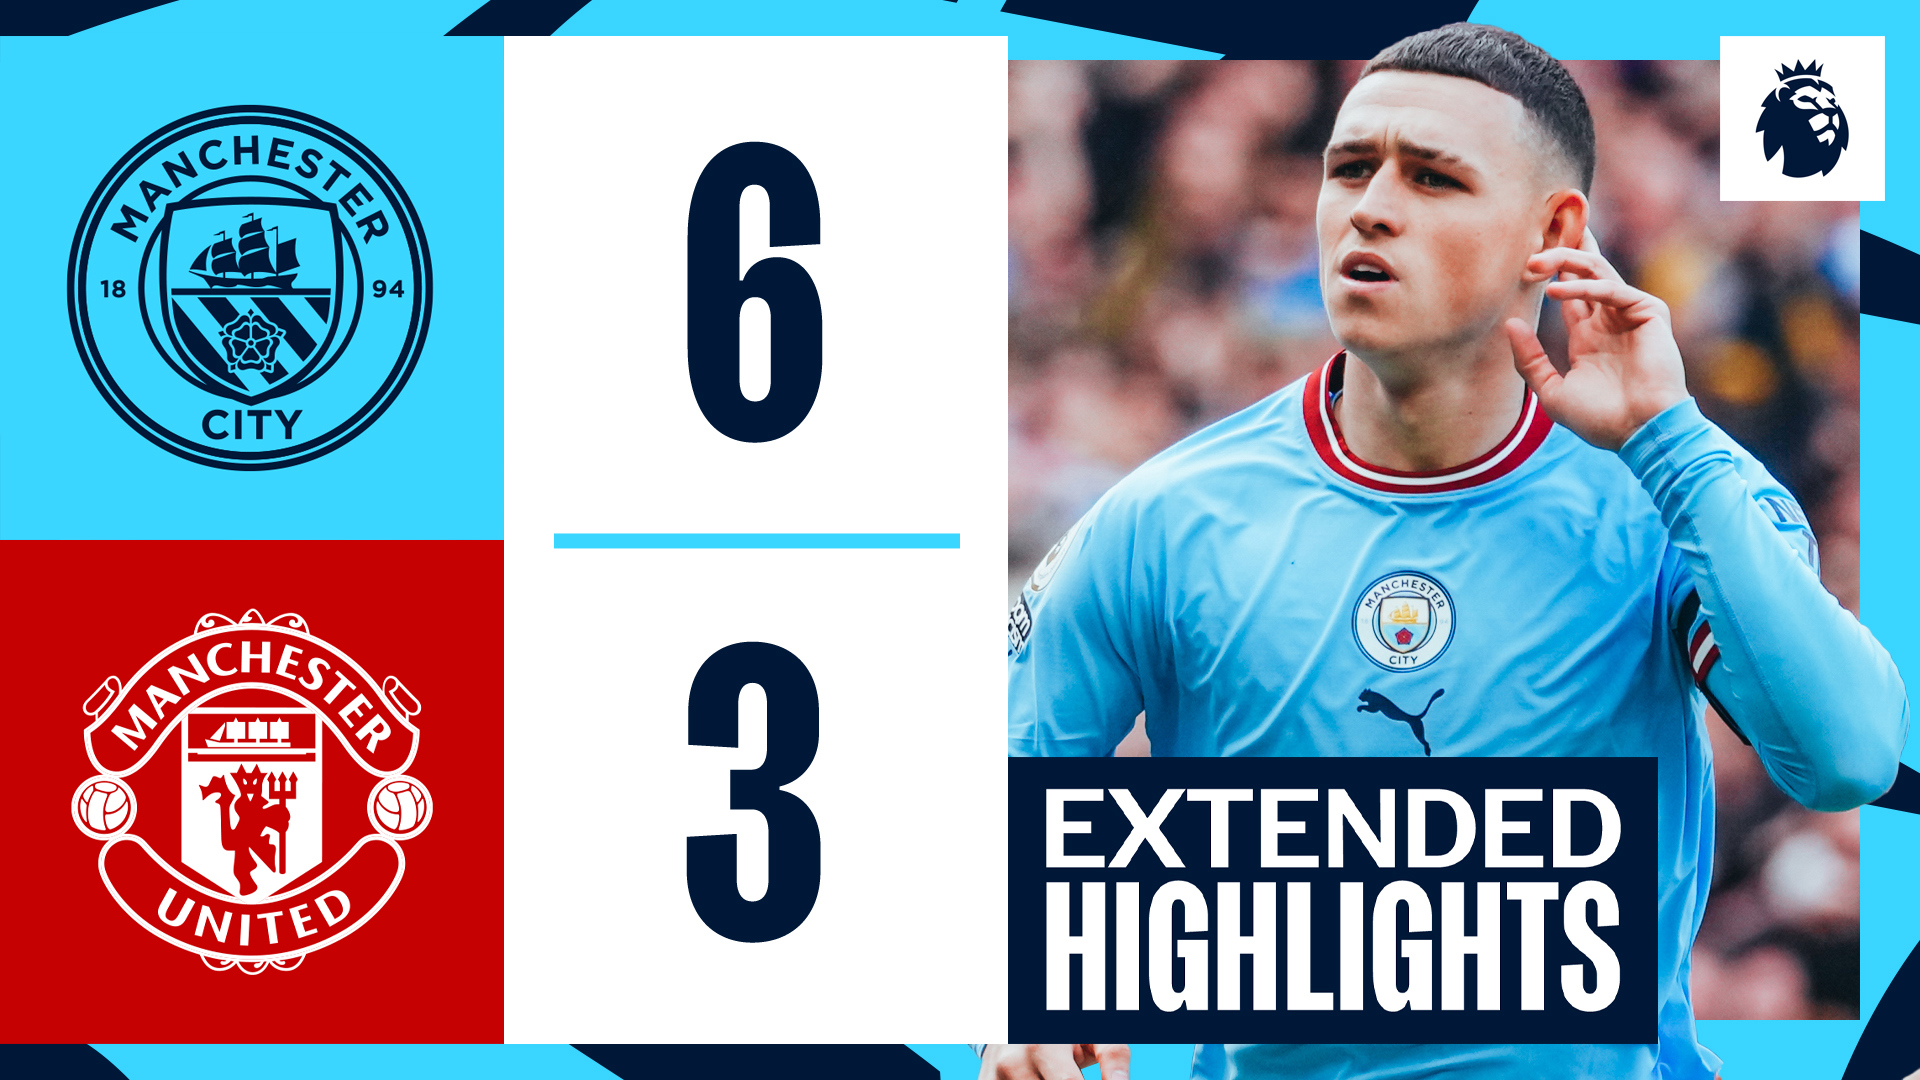 Extended Highlights: City 6-3 United